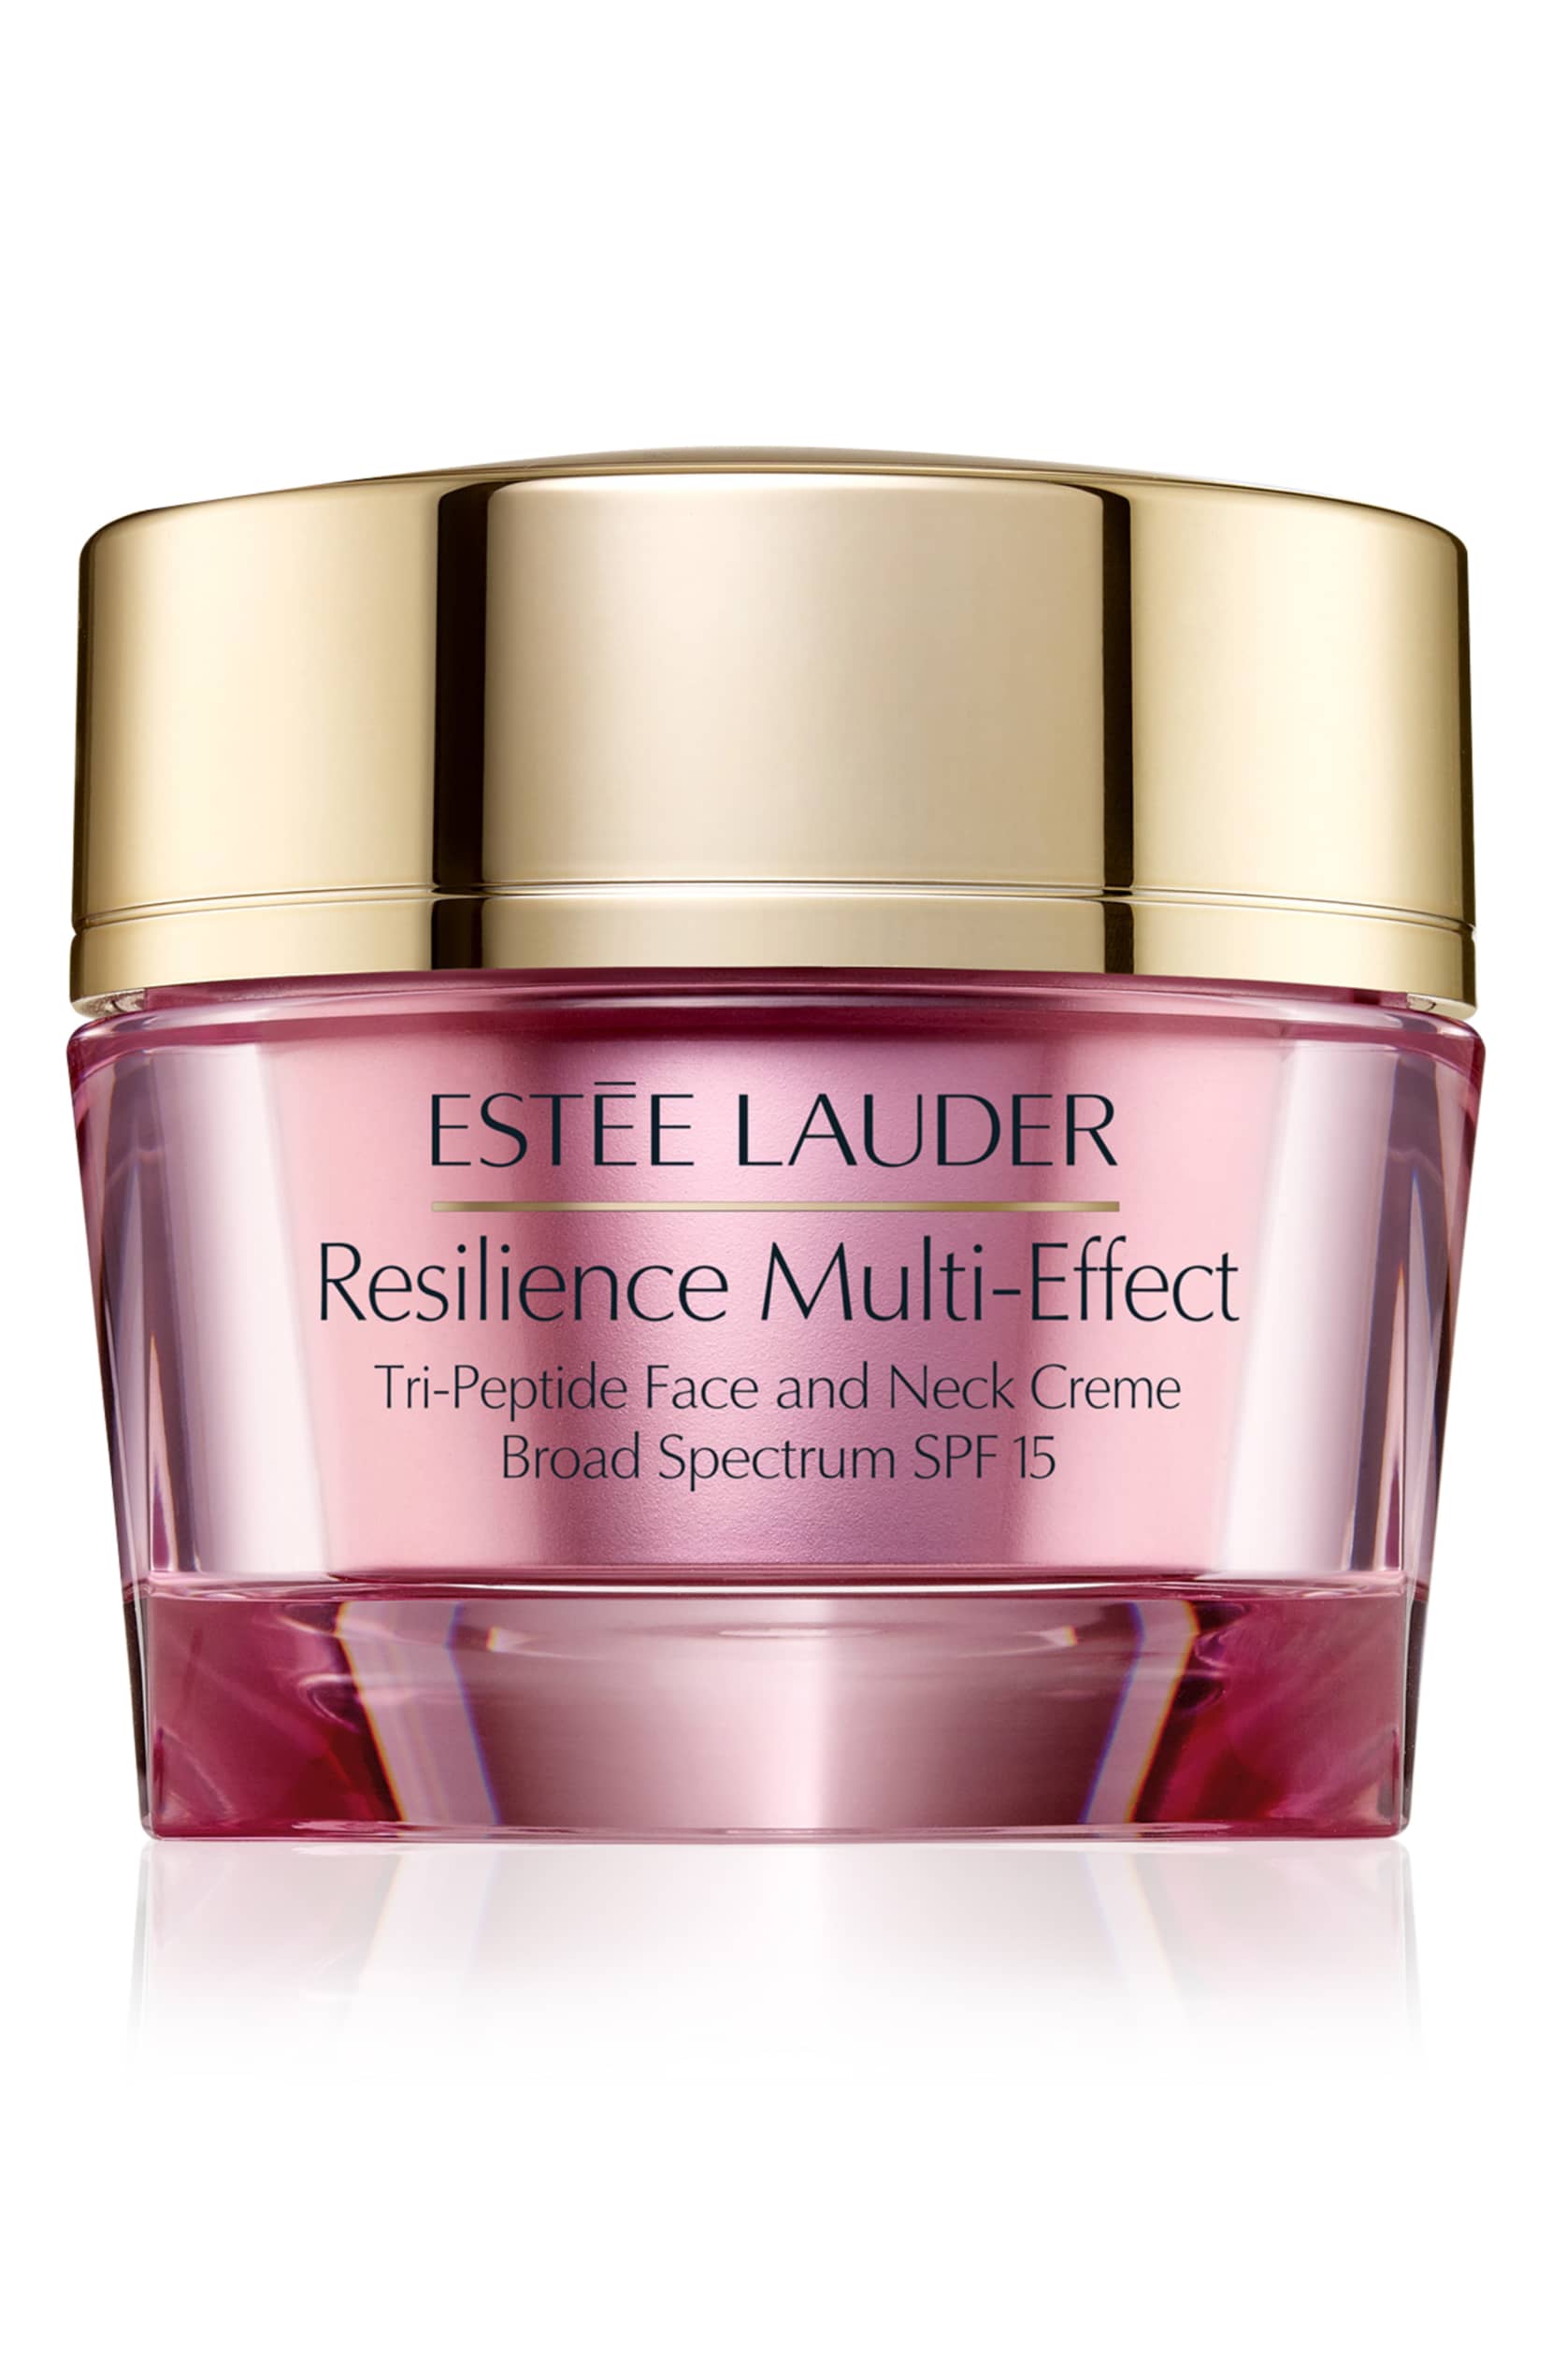 Estee Lauder Resilience Multi-Effect Tri-Peptide Face and Neck Creme SPF 15 (Normal/Combination), 1.7 oz